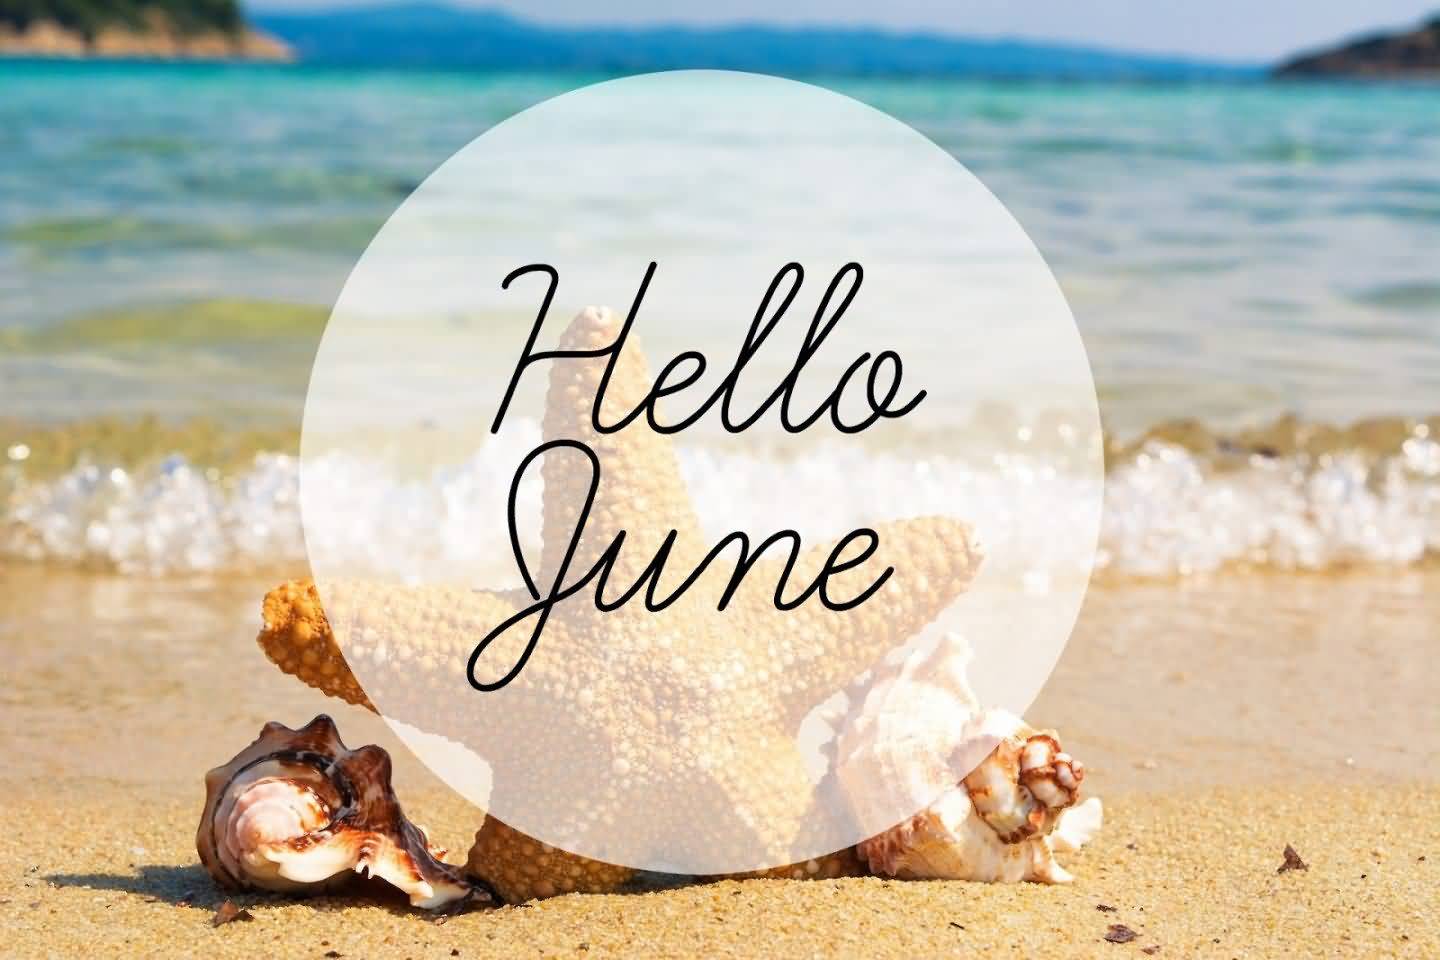 welcome-june-images-hello-june-be-welcome-quote-images-hd-free